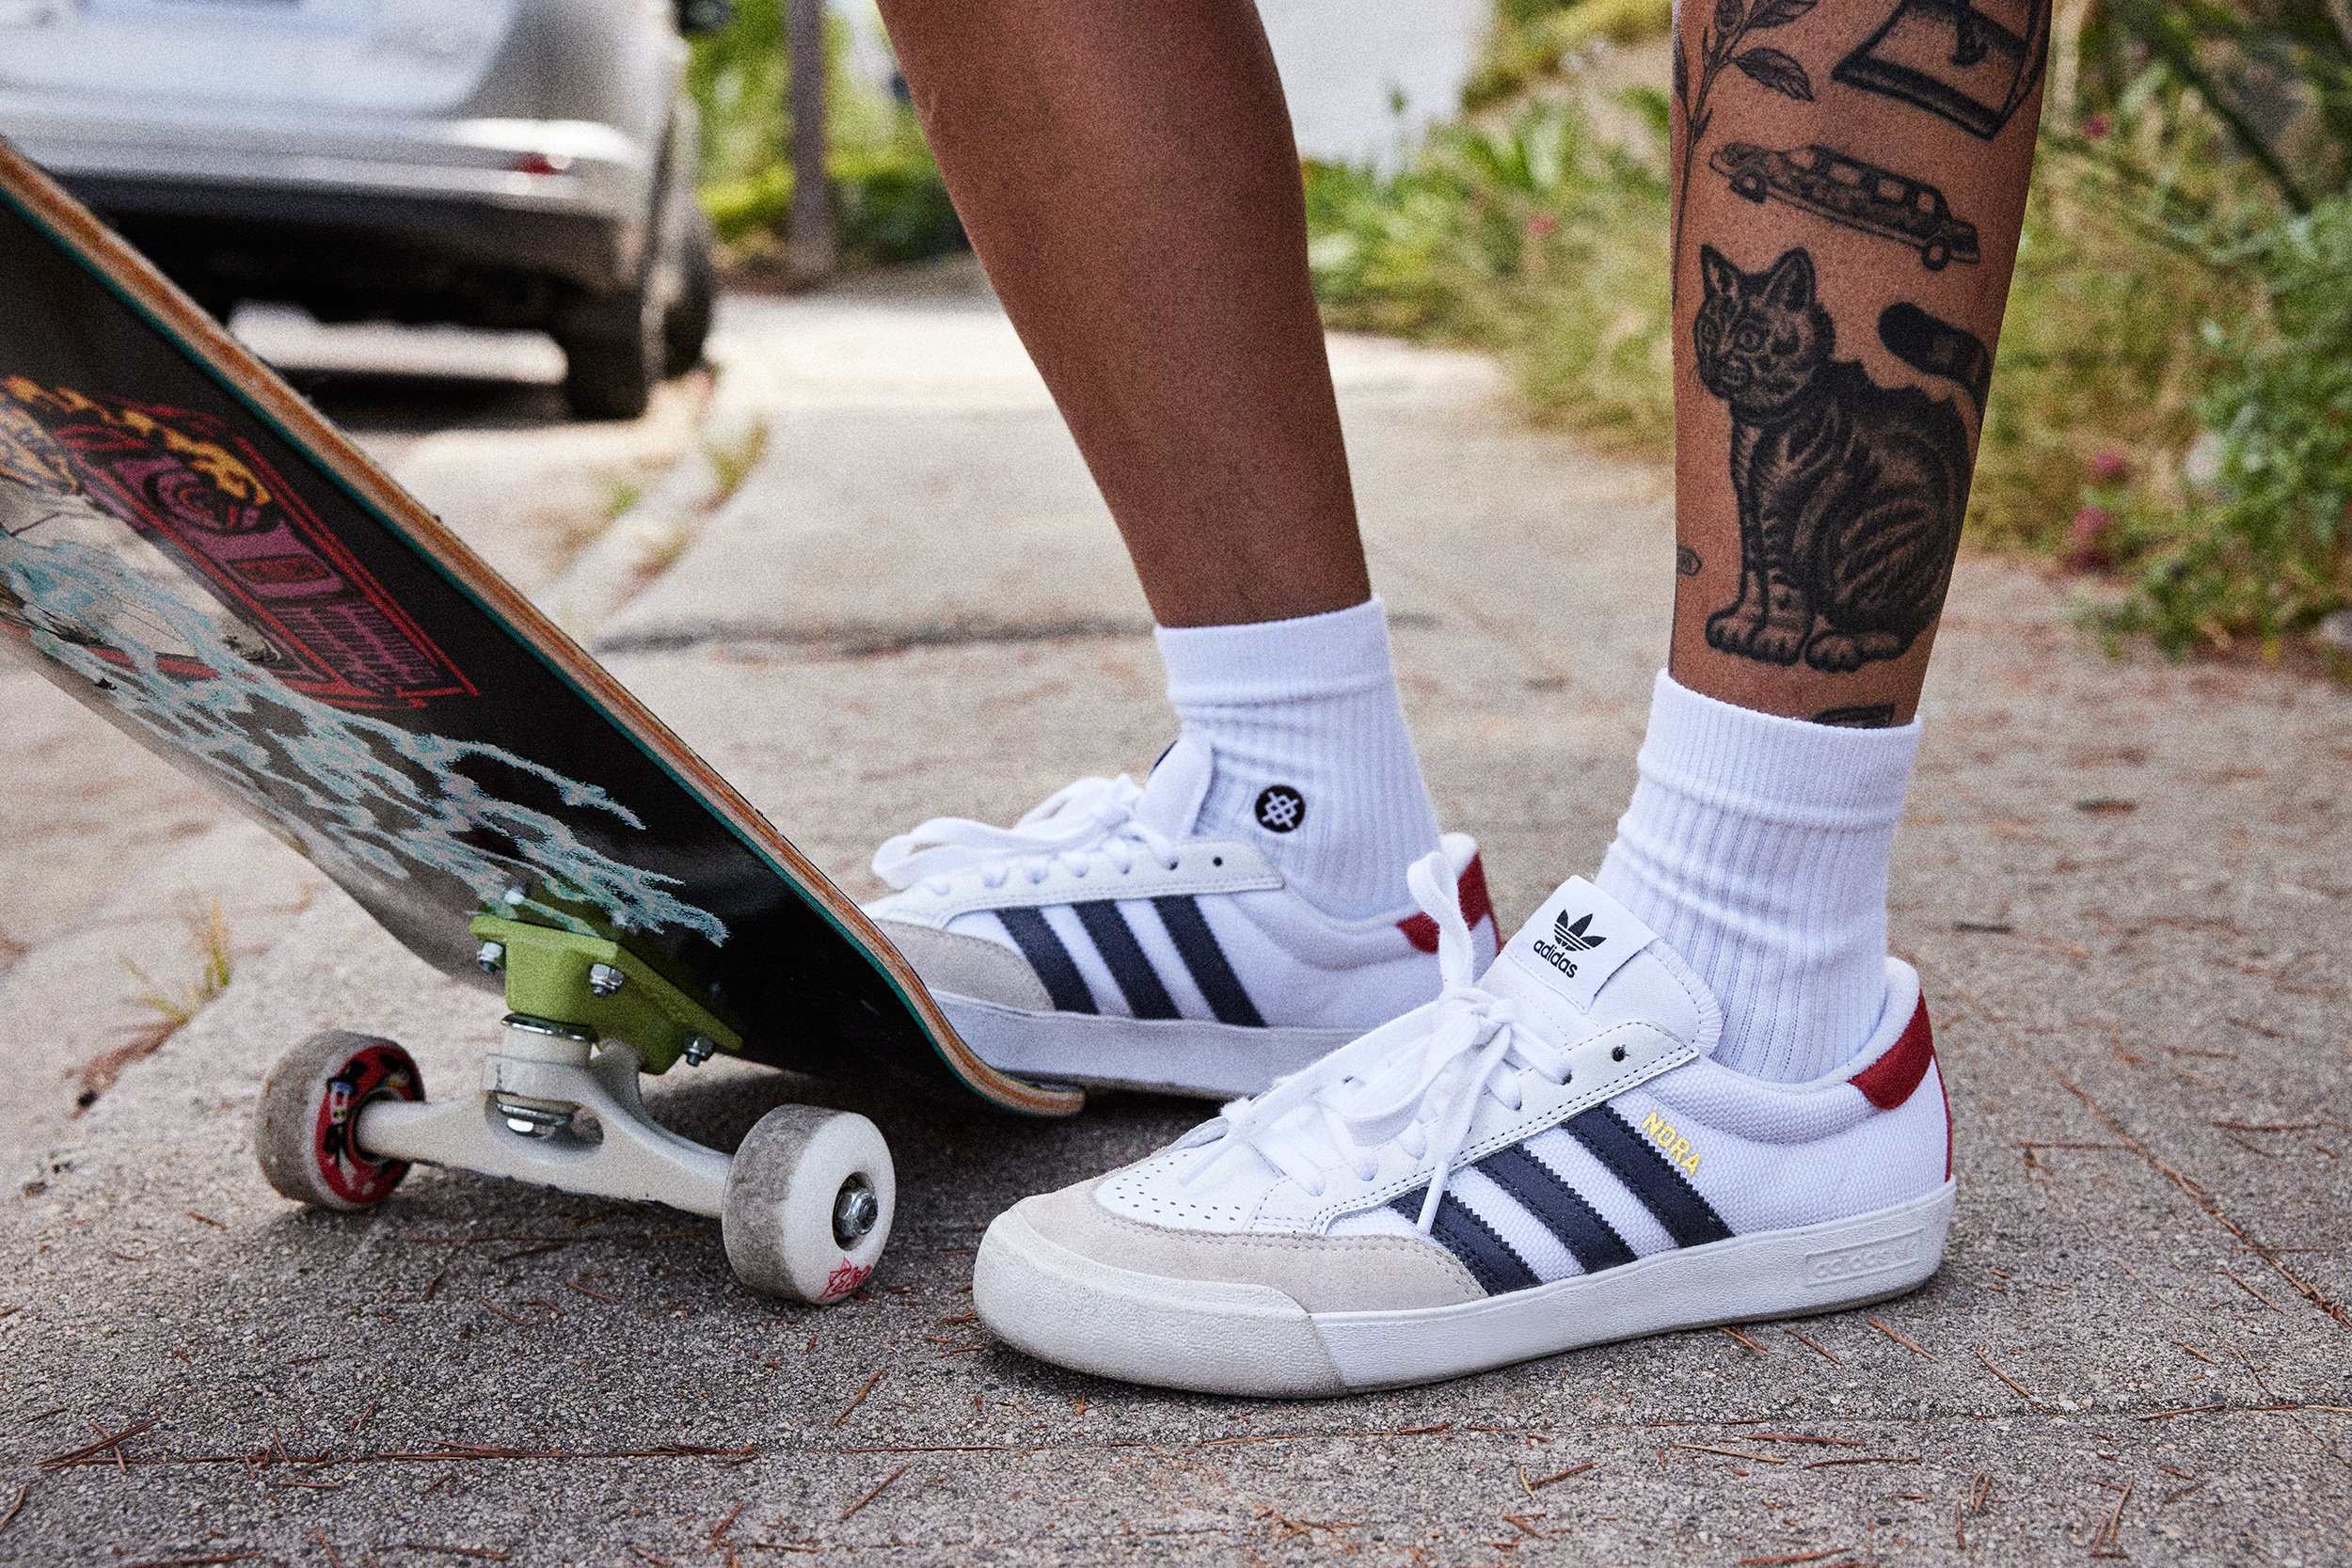 Nora Vasconcello's New Adidas Pro Model Shoe Drops Today - Get Em' Fast! — Girl Is NOT A 4 Letter